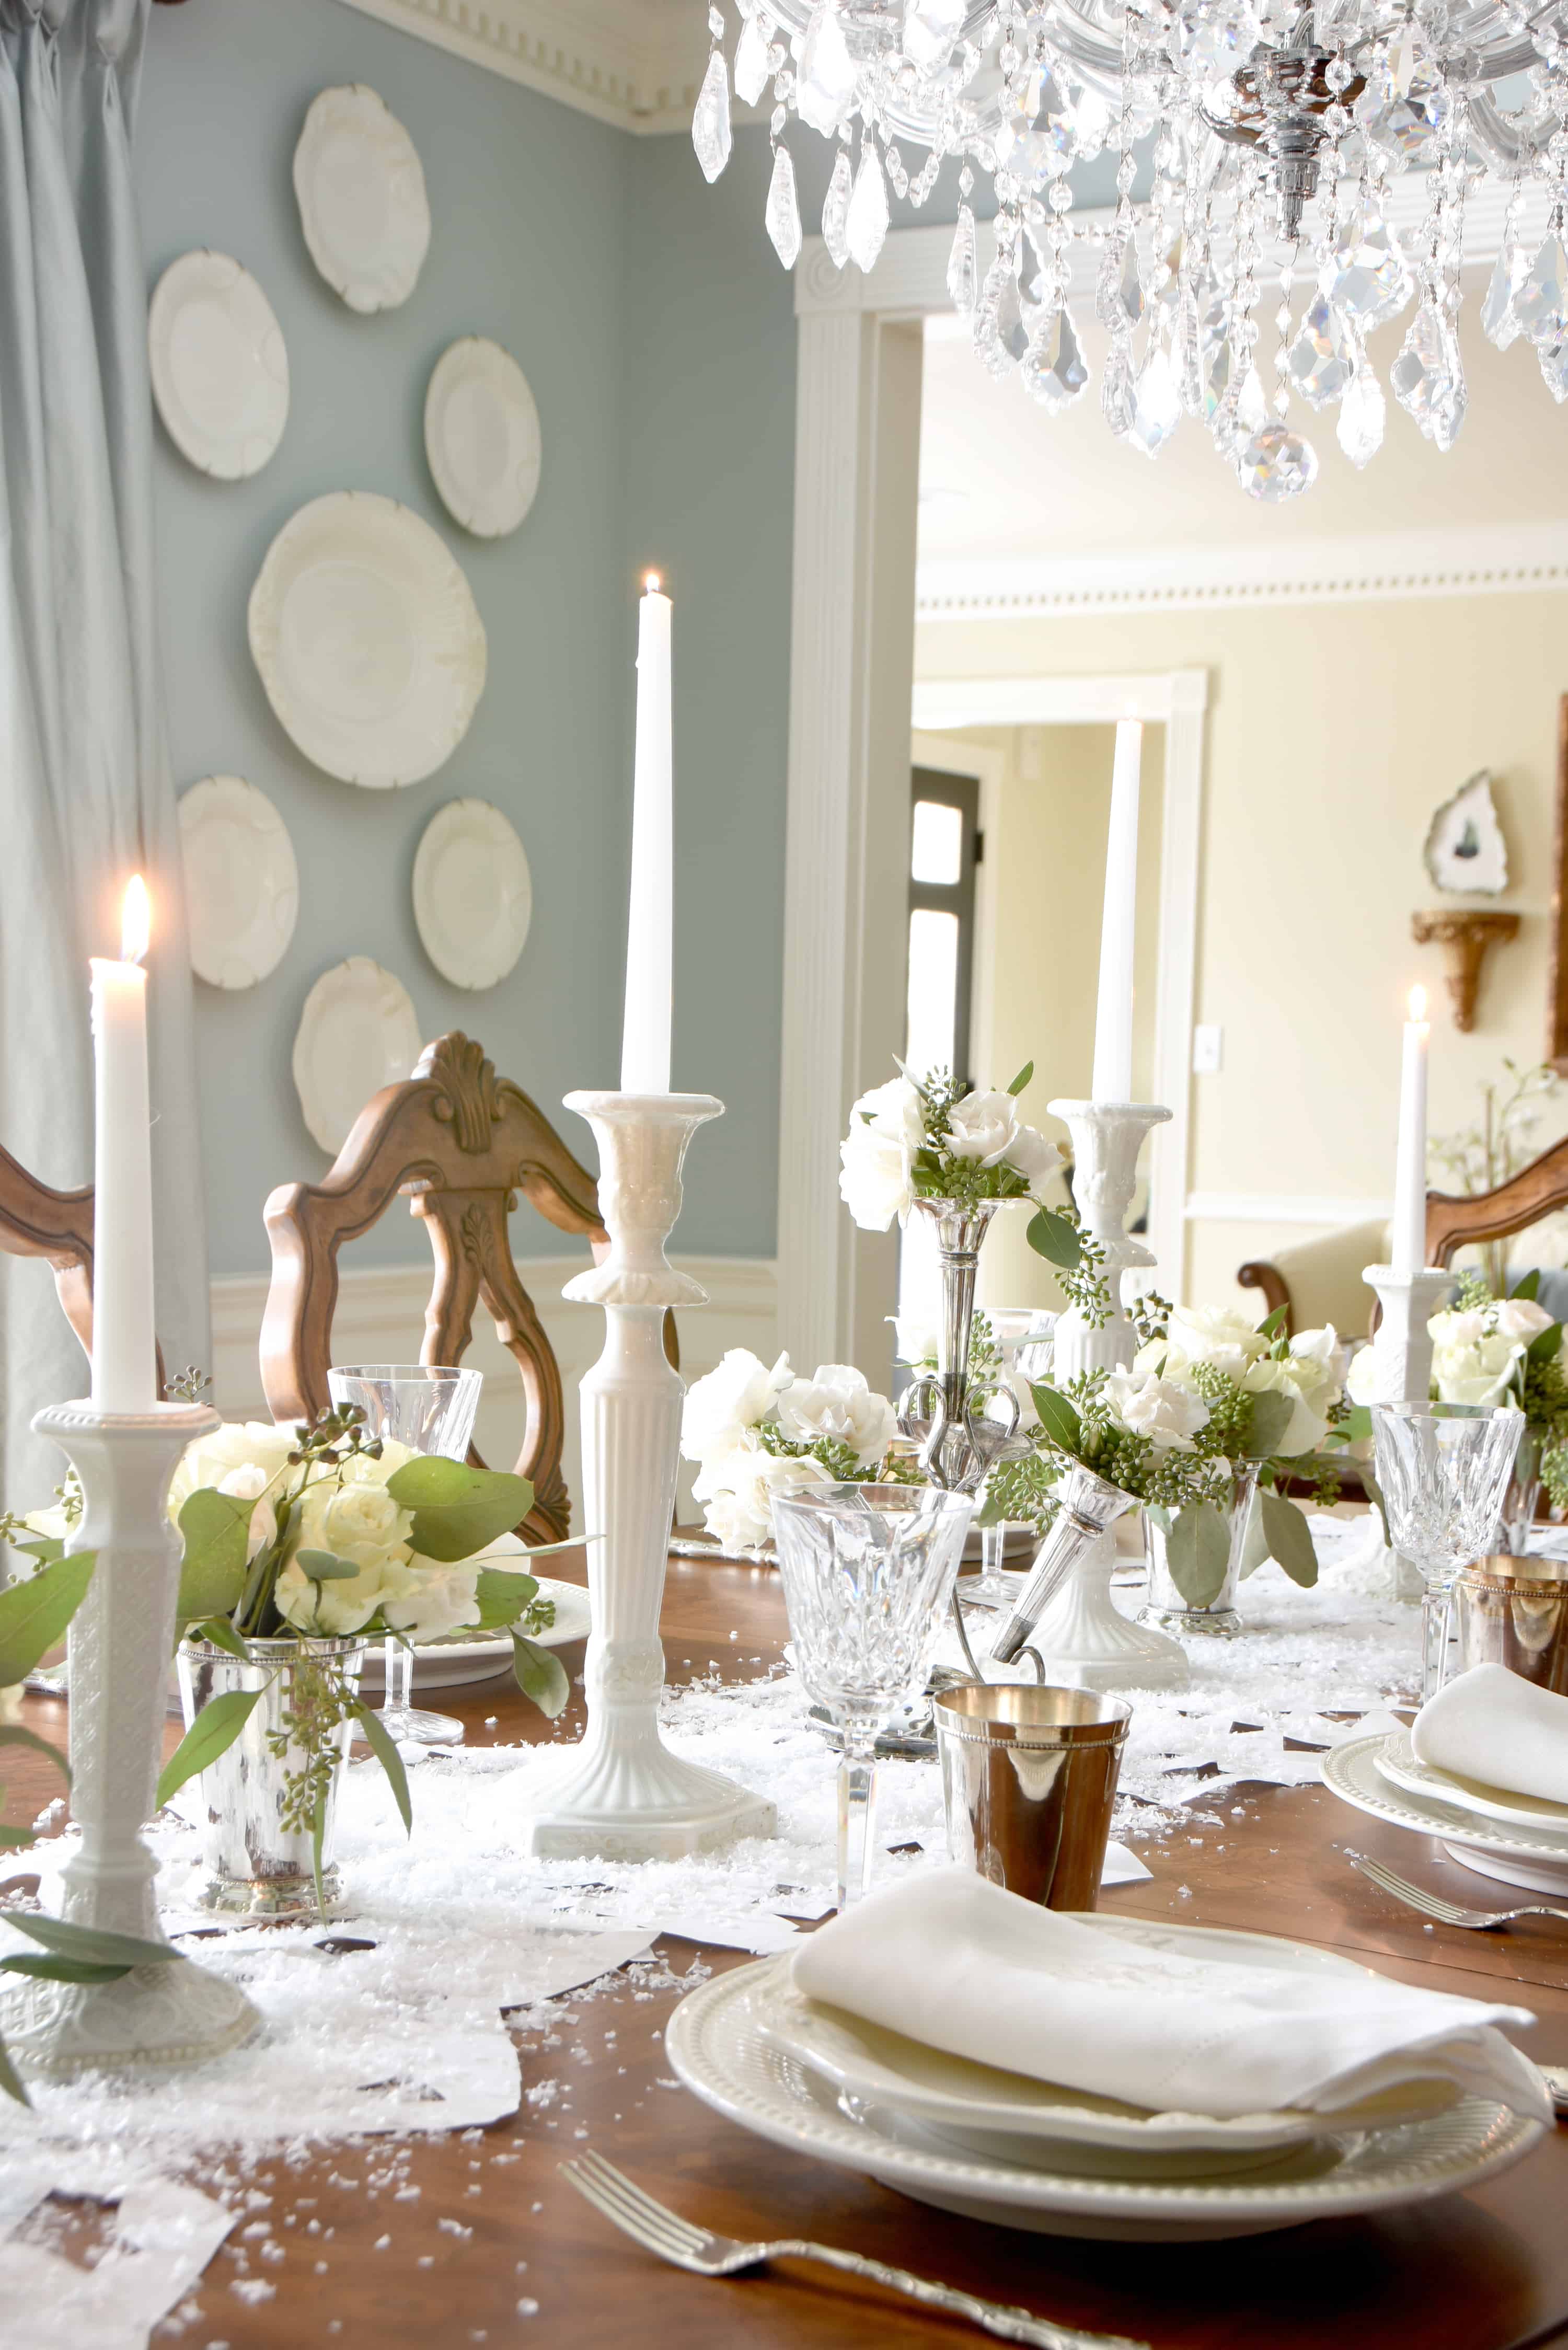 A Snowy Formal Dining Table – Dixie Delights